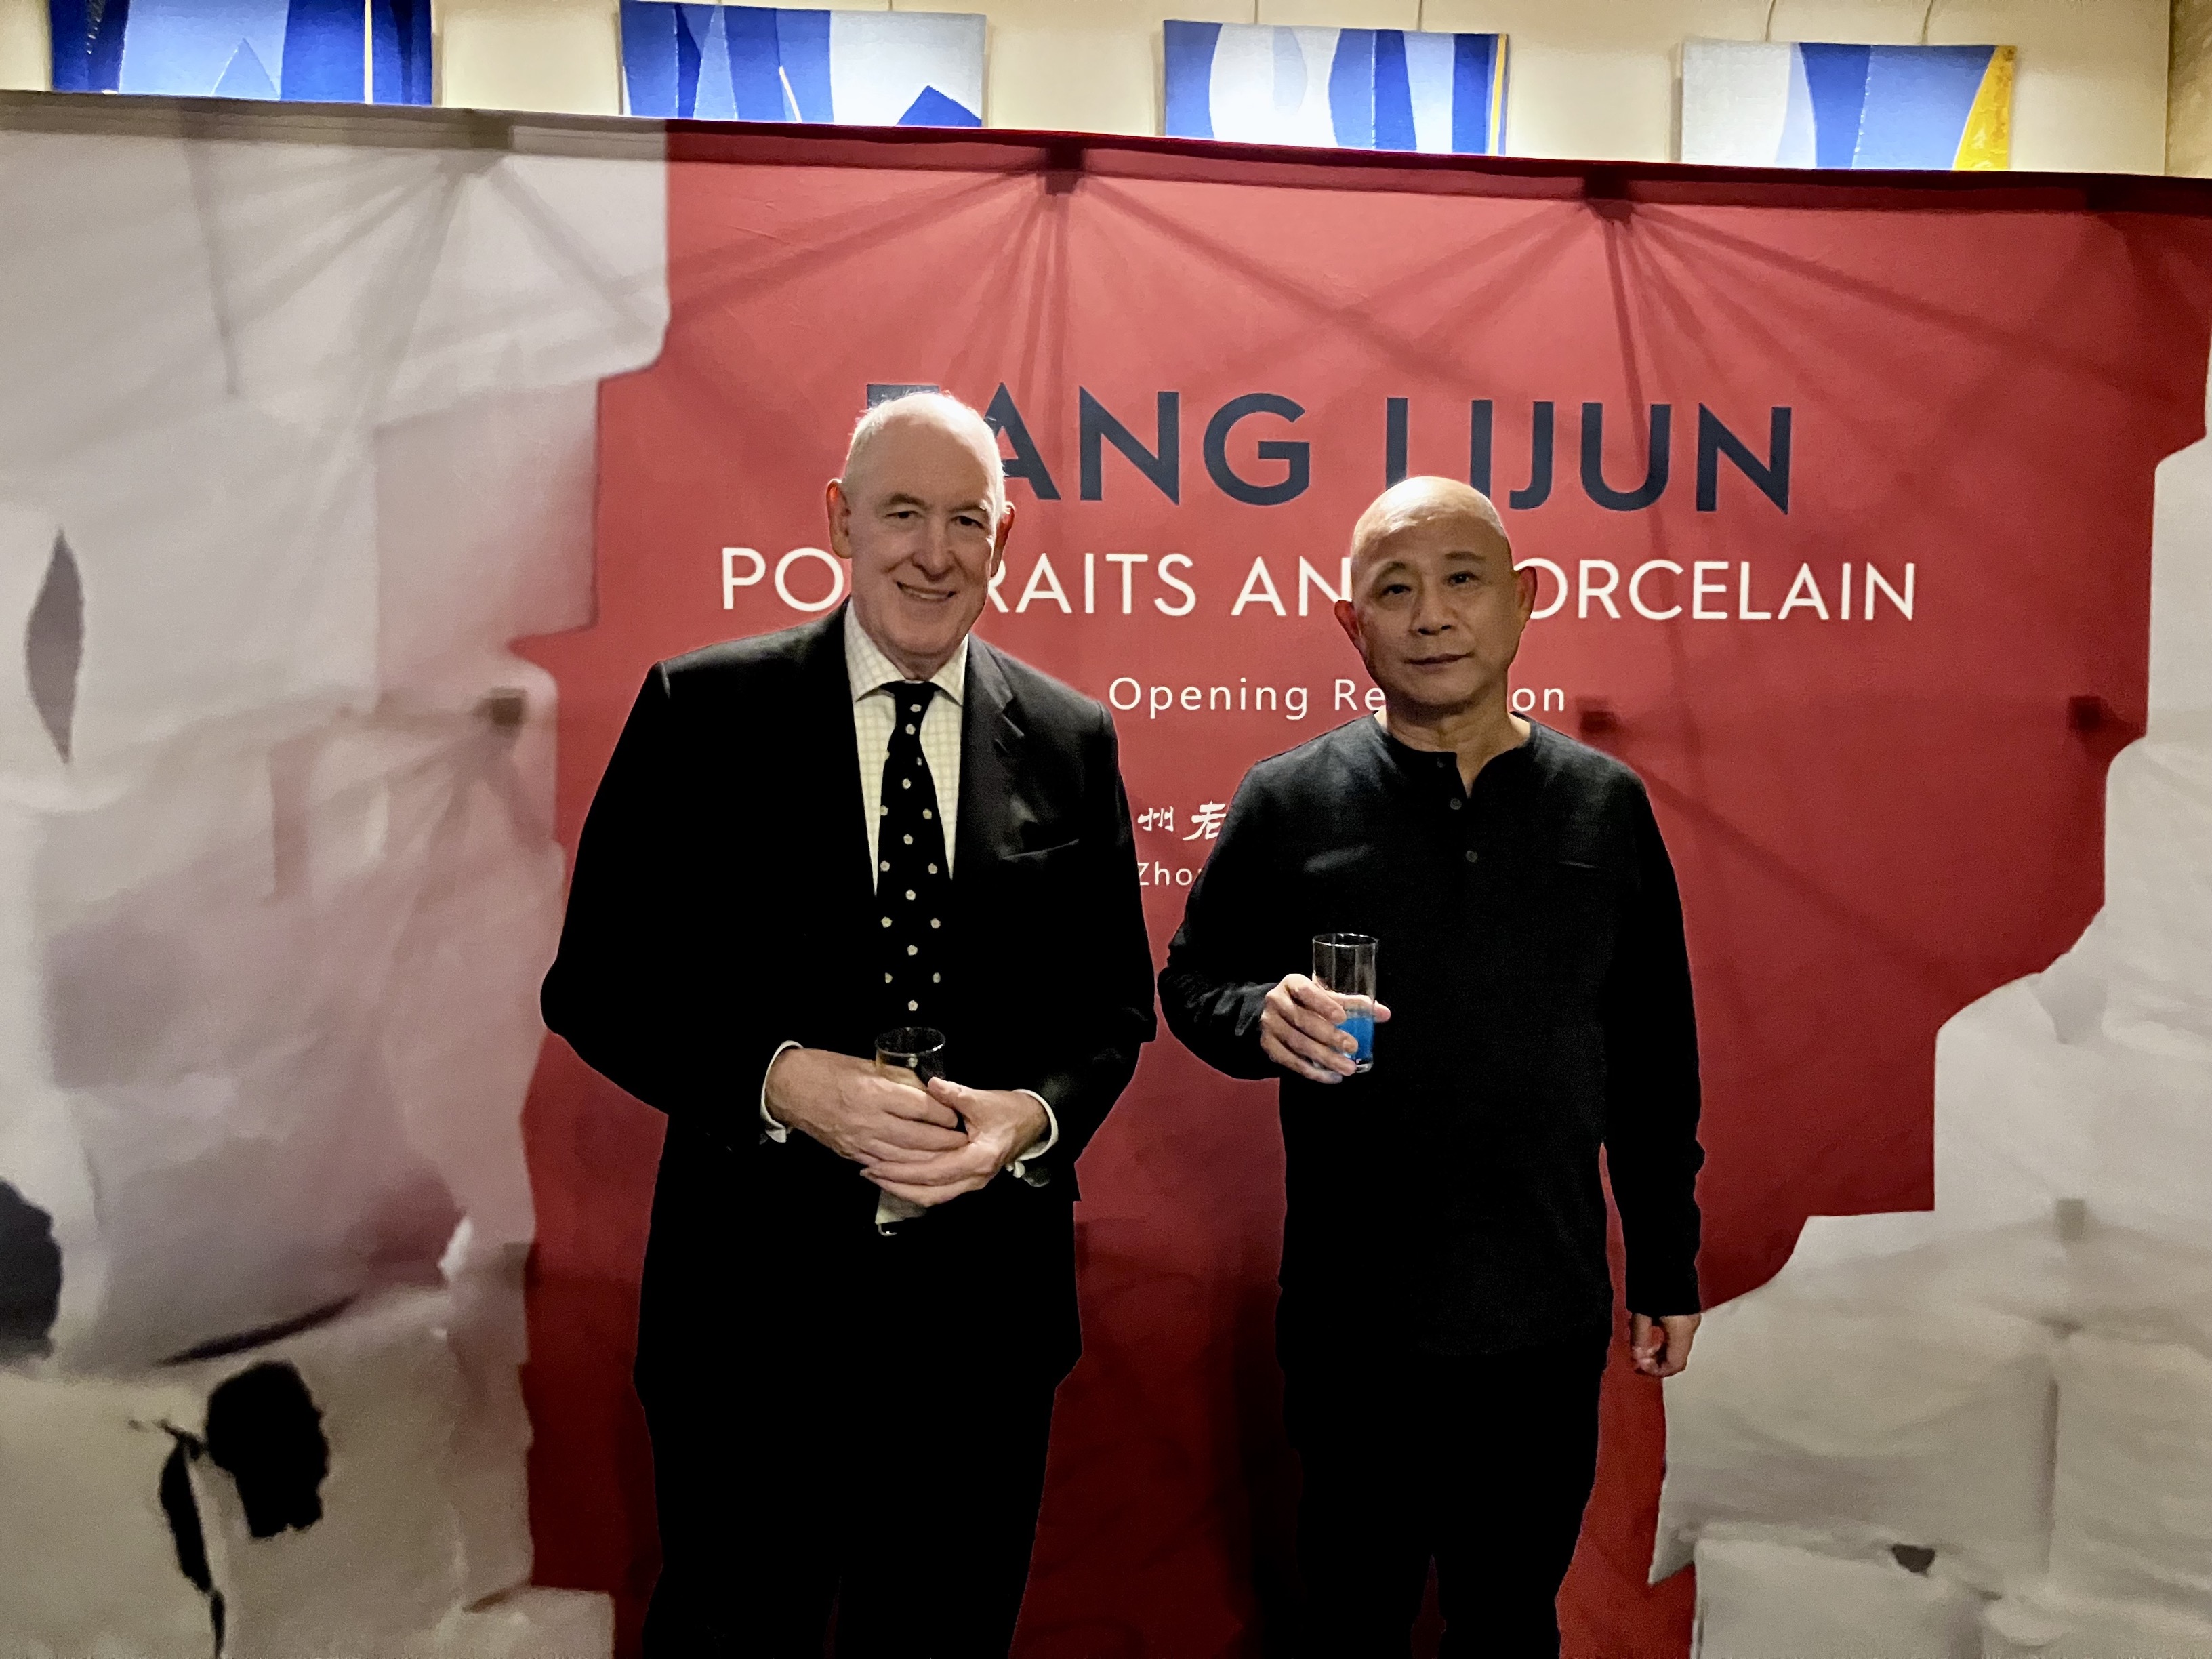 Fang Lijun and Miles Young standing in front of the exhibition banner